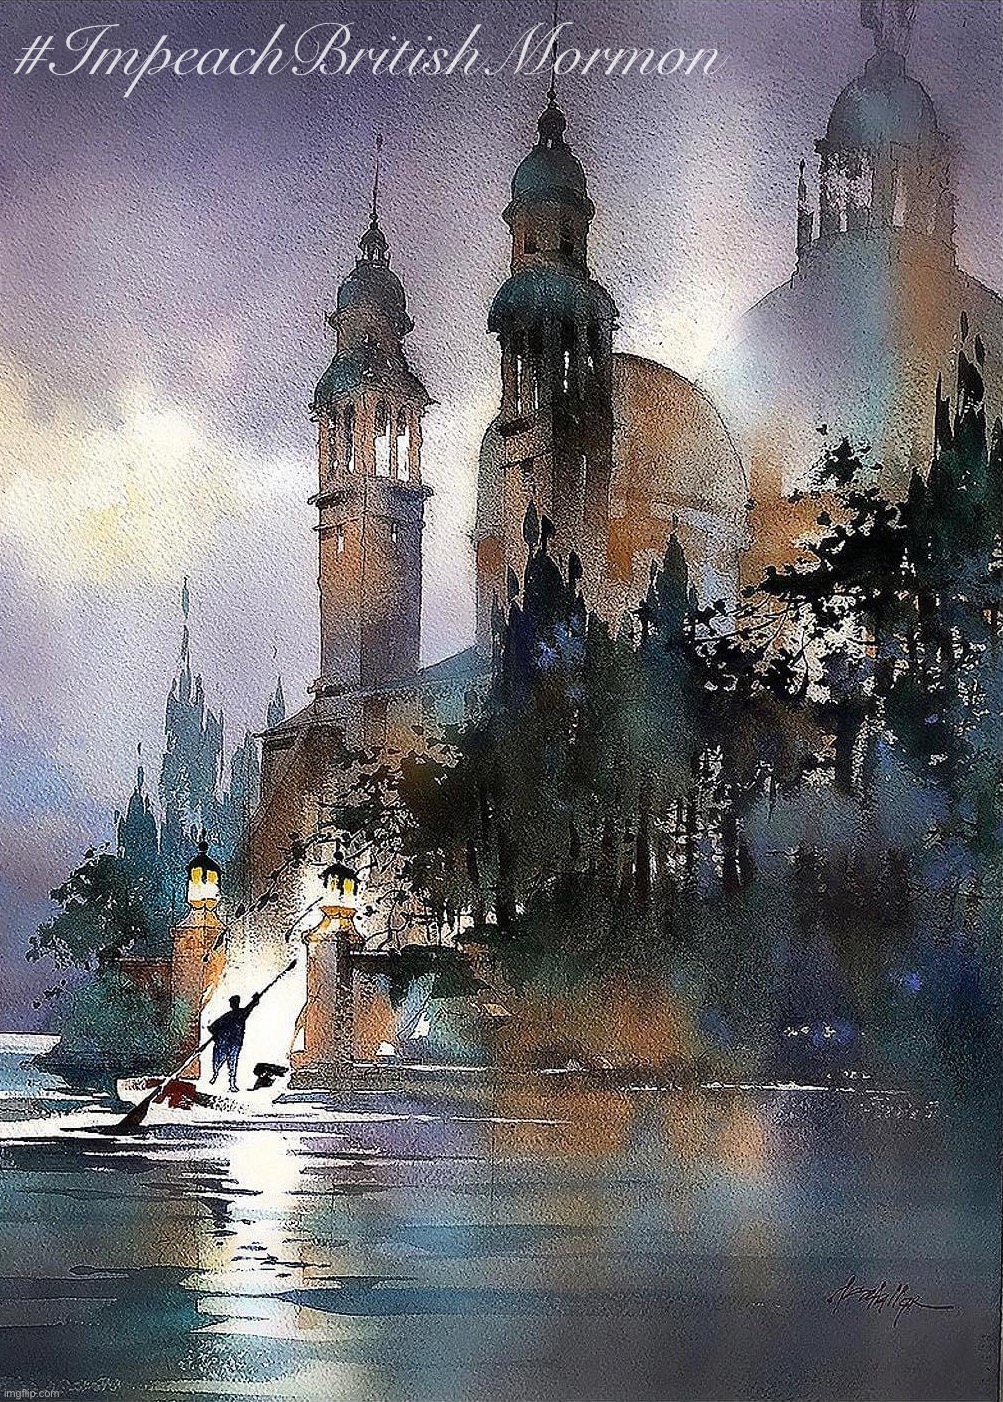 Impeachment charges: — 1. Undermining the Senate — 2. Being IG — 3. Being inactive — 4. Being cringe — 5. Being unfunny — | #ImpeachBritishMormon | image tagged in thomas w schaller watercolor painting,impeach,britishmormon,im,peach,impeach britishmormon | made w/ Imgflip meme maker